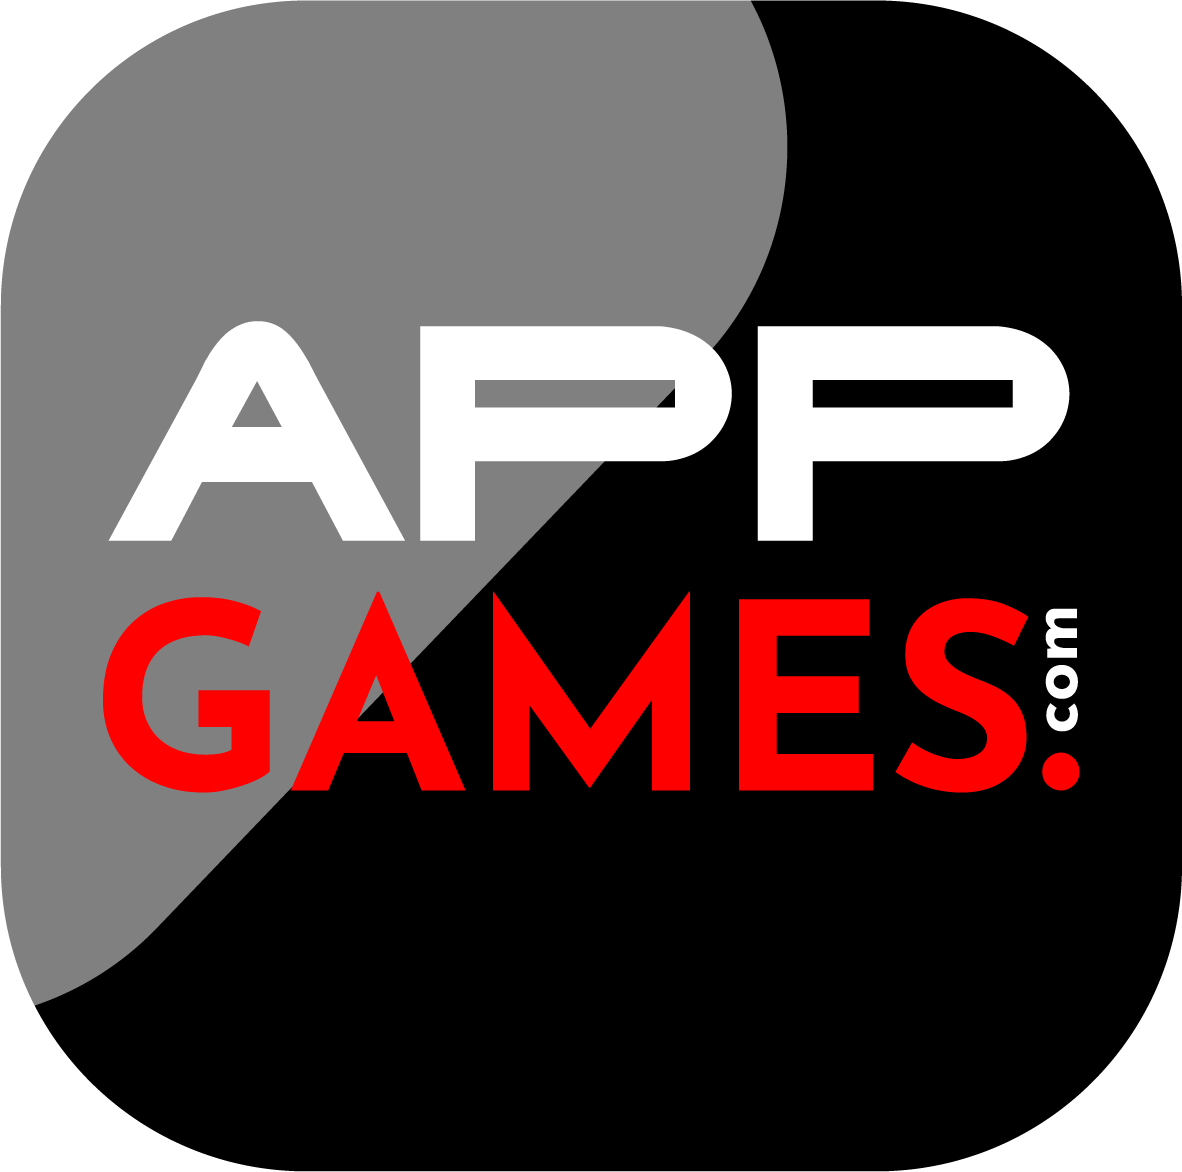 Mobile Gaming Resource Site AppGames.com Launches New Website 1